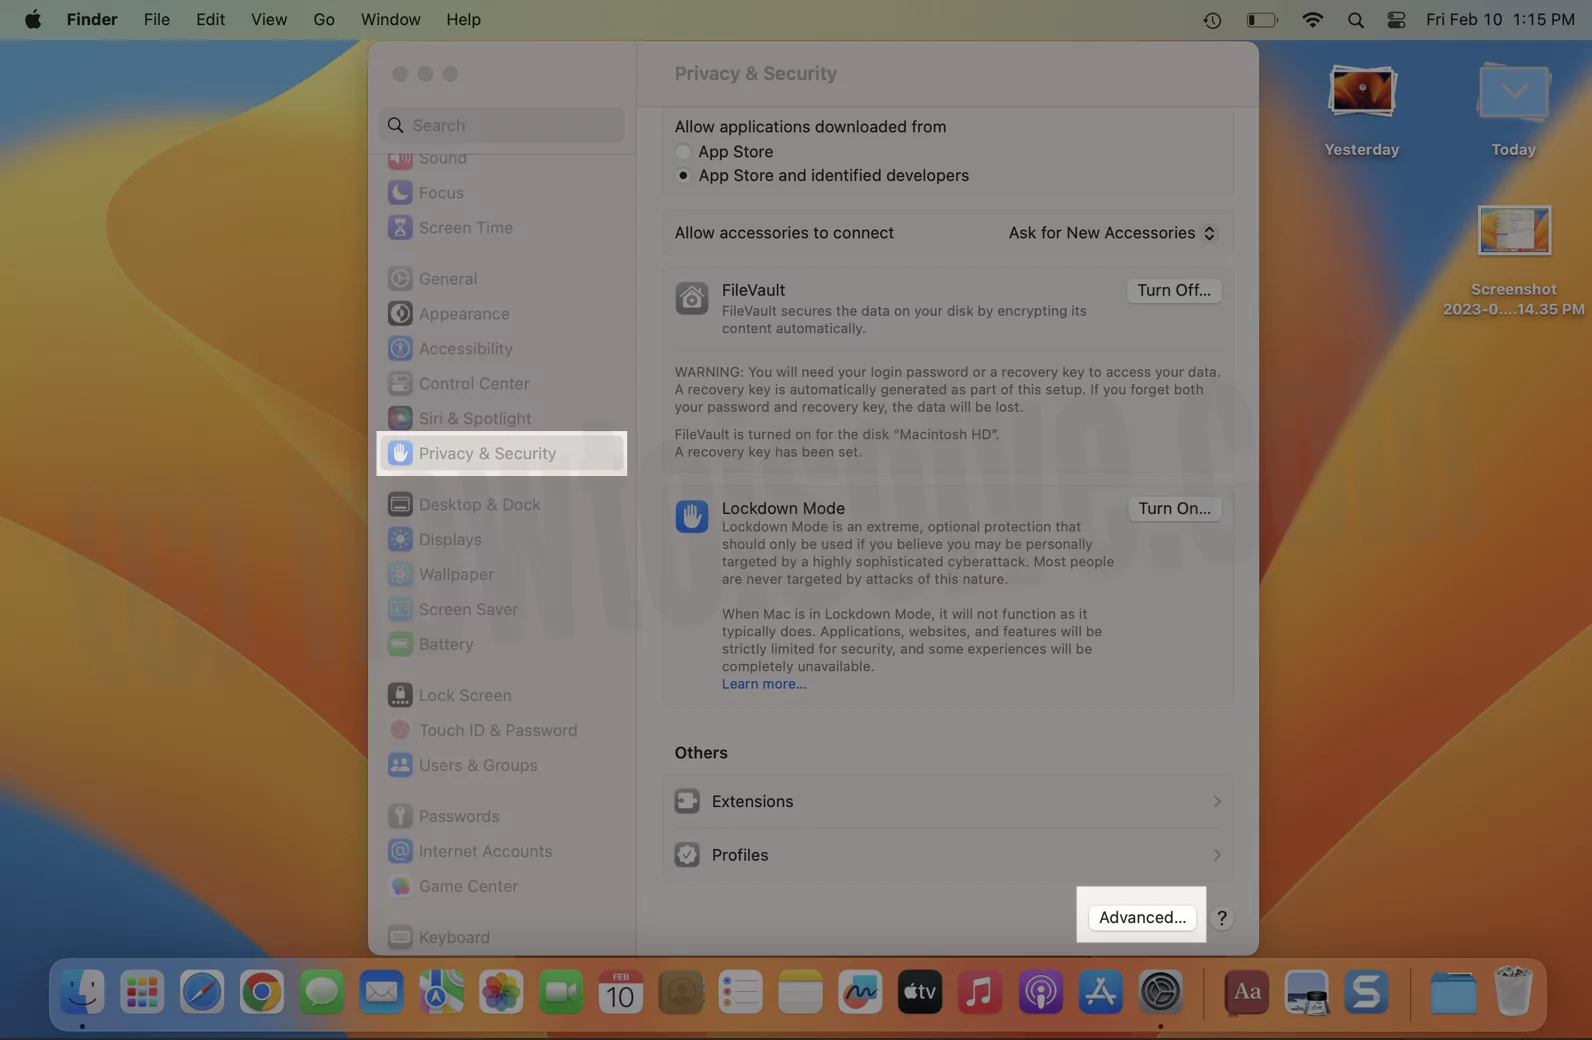 advanced-privacy-security-option-on-mac